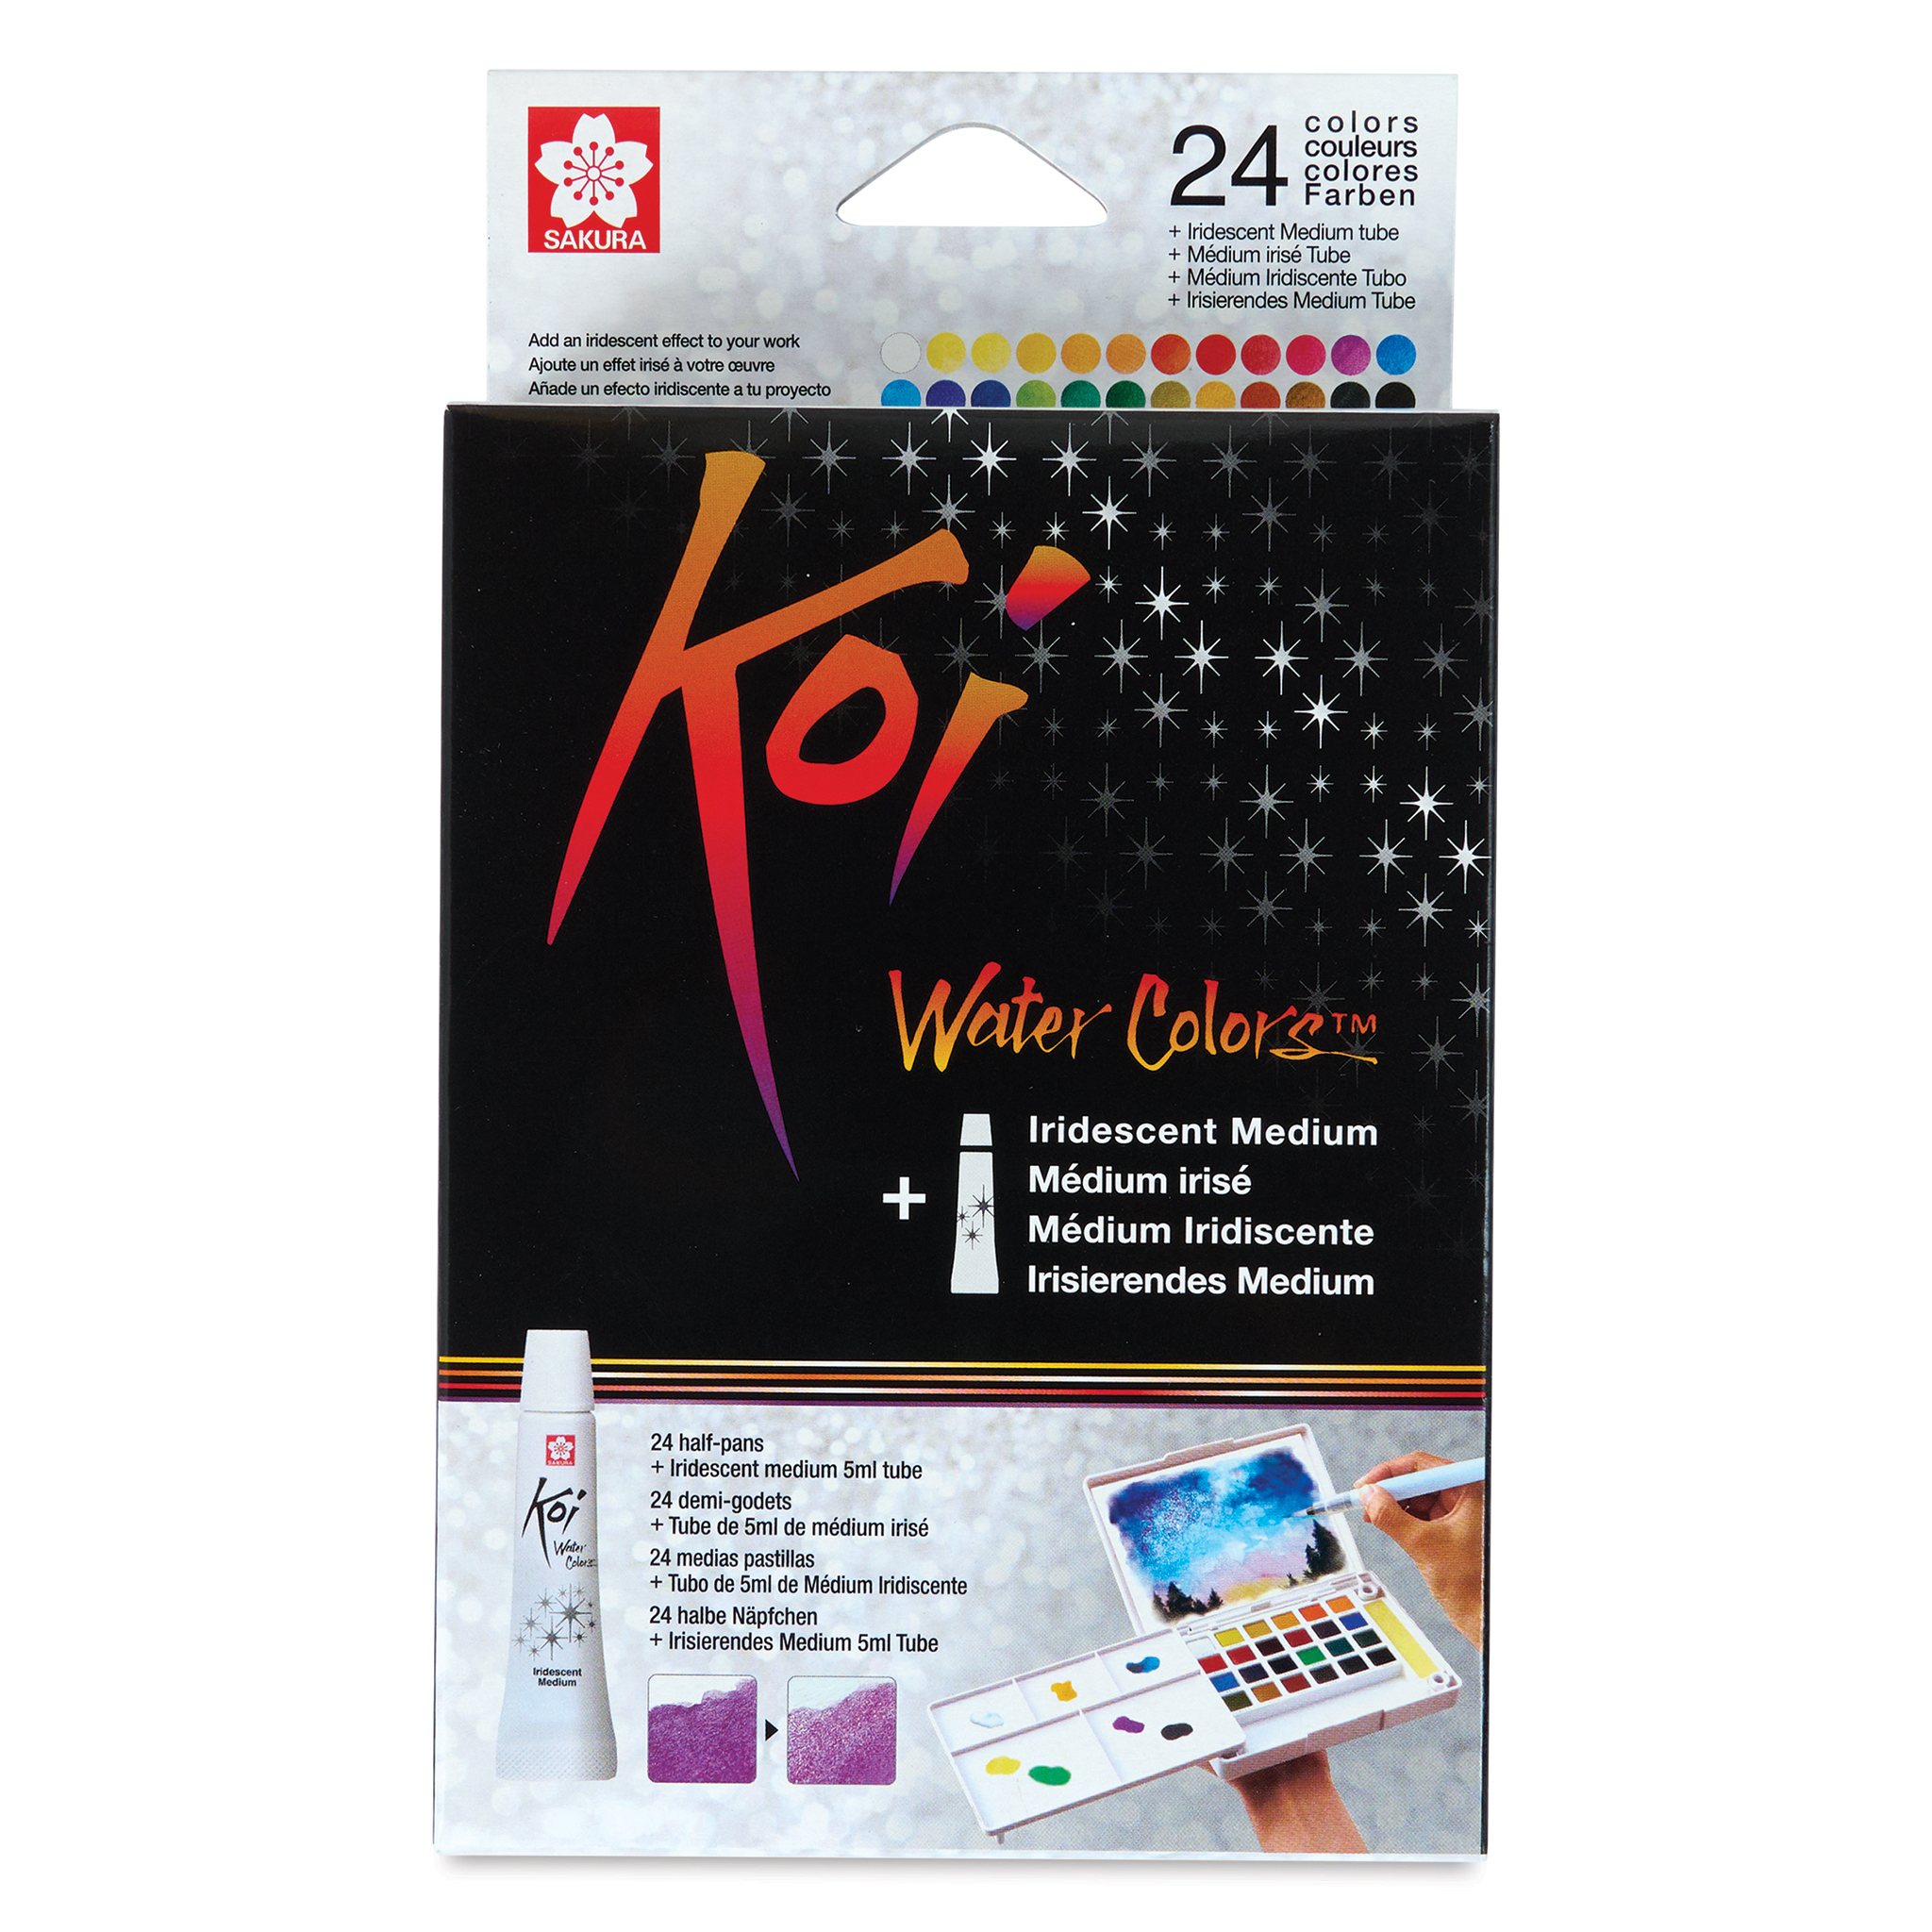 Sakura Koi Watercolor Sets contain an assortment of half-pan watercolors in  a convenient case for sketching on the …